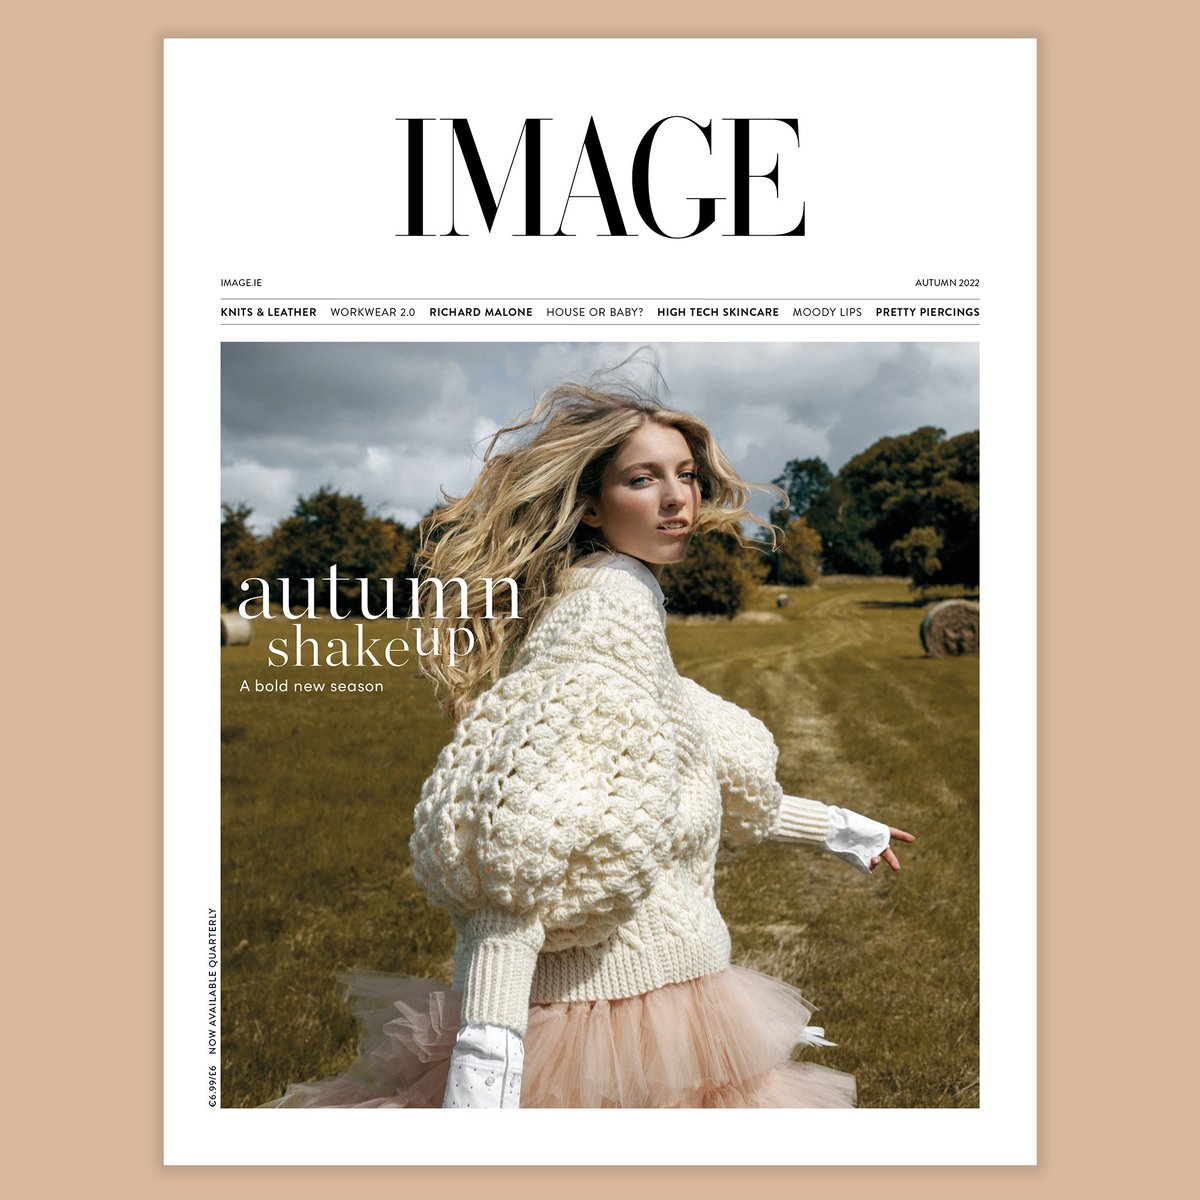 September is just around the corner, and that means IMAGE Autumn is here! 🍂 On sale Thursday, September 1 🍁 Can't find the latest issue in your local shop? Visit image.ie/magazine to buy your copy and have it delivered directly to your door #IMAGEautumn2022 #IMAGEprint